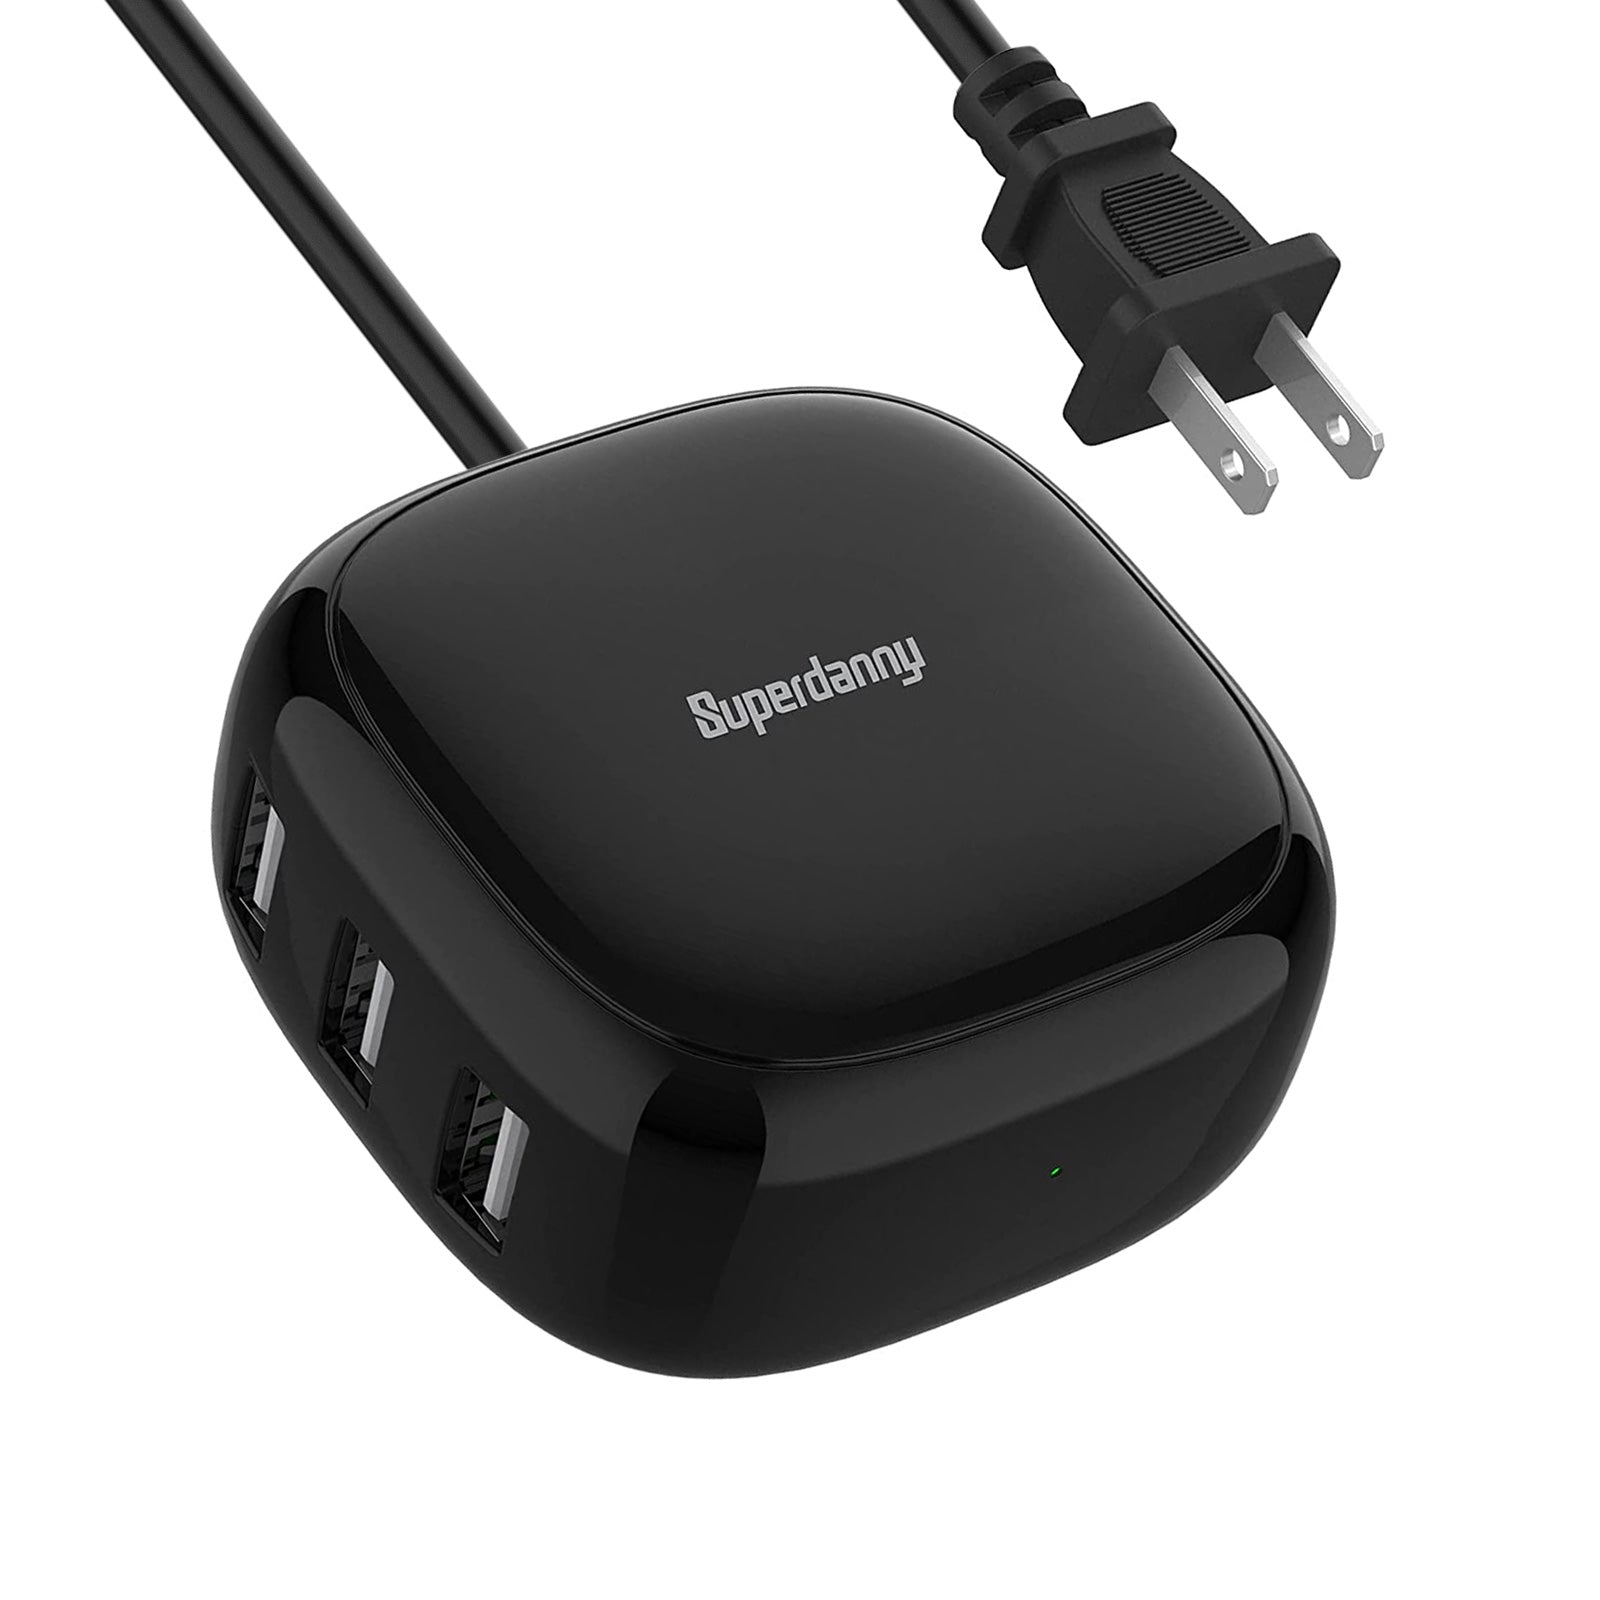 SUPERDANNY USB Charger with 6 Ports USB Charging Station